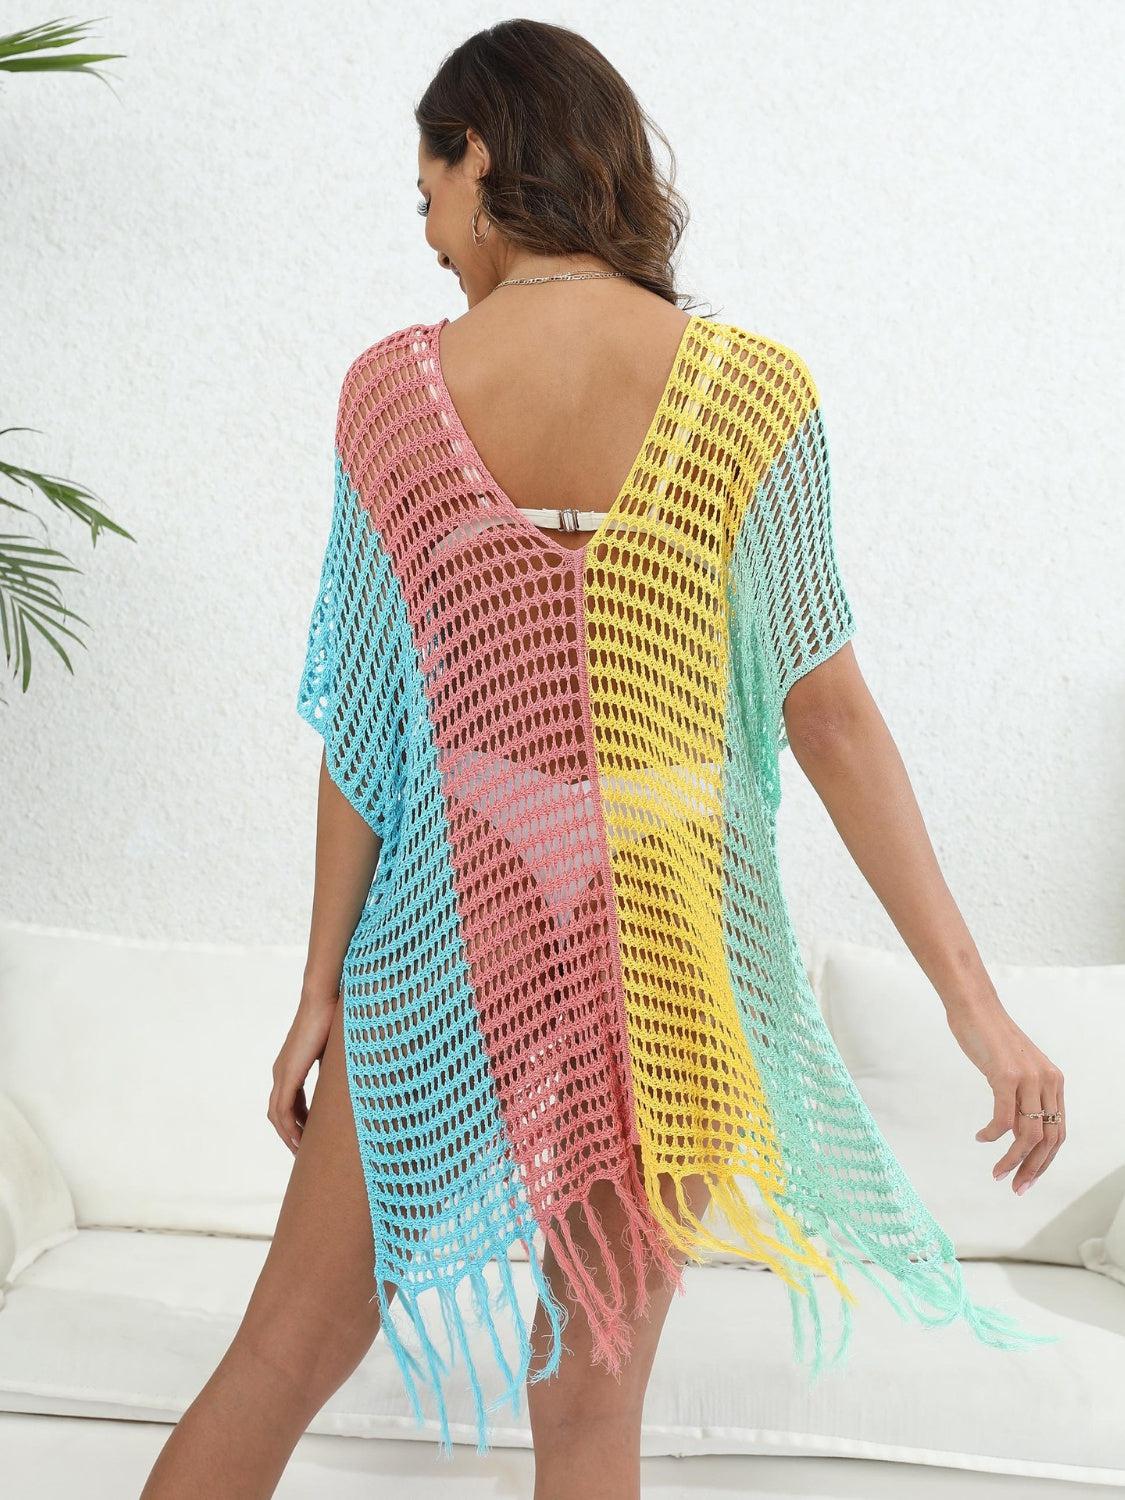 a woman wearing a colorful crochet cover up